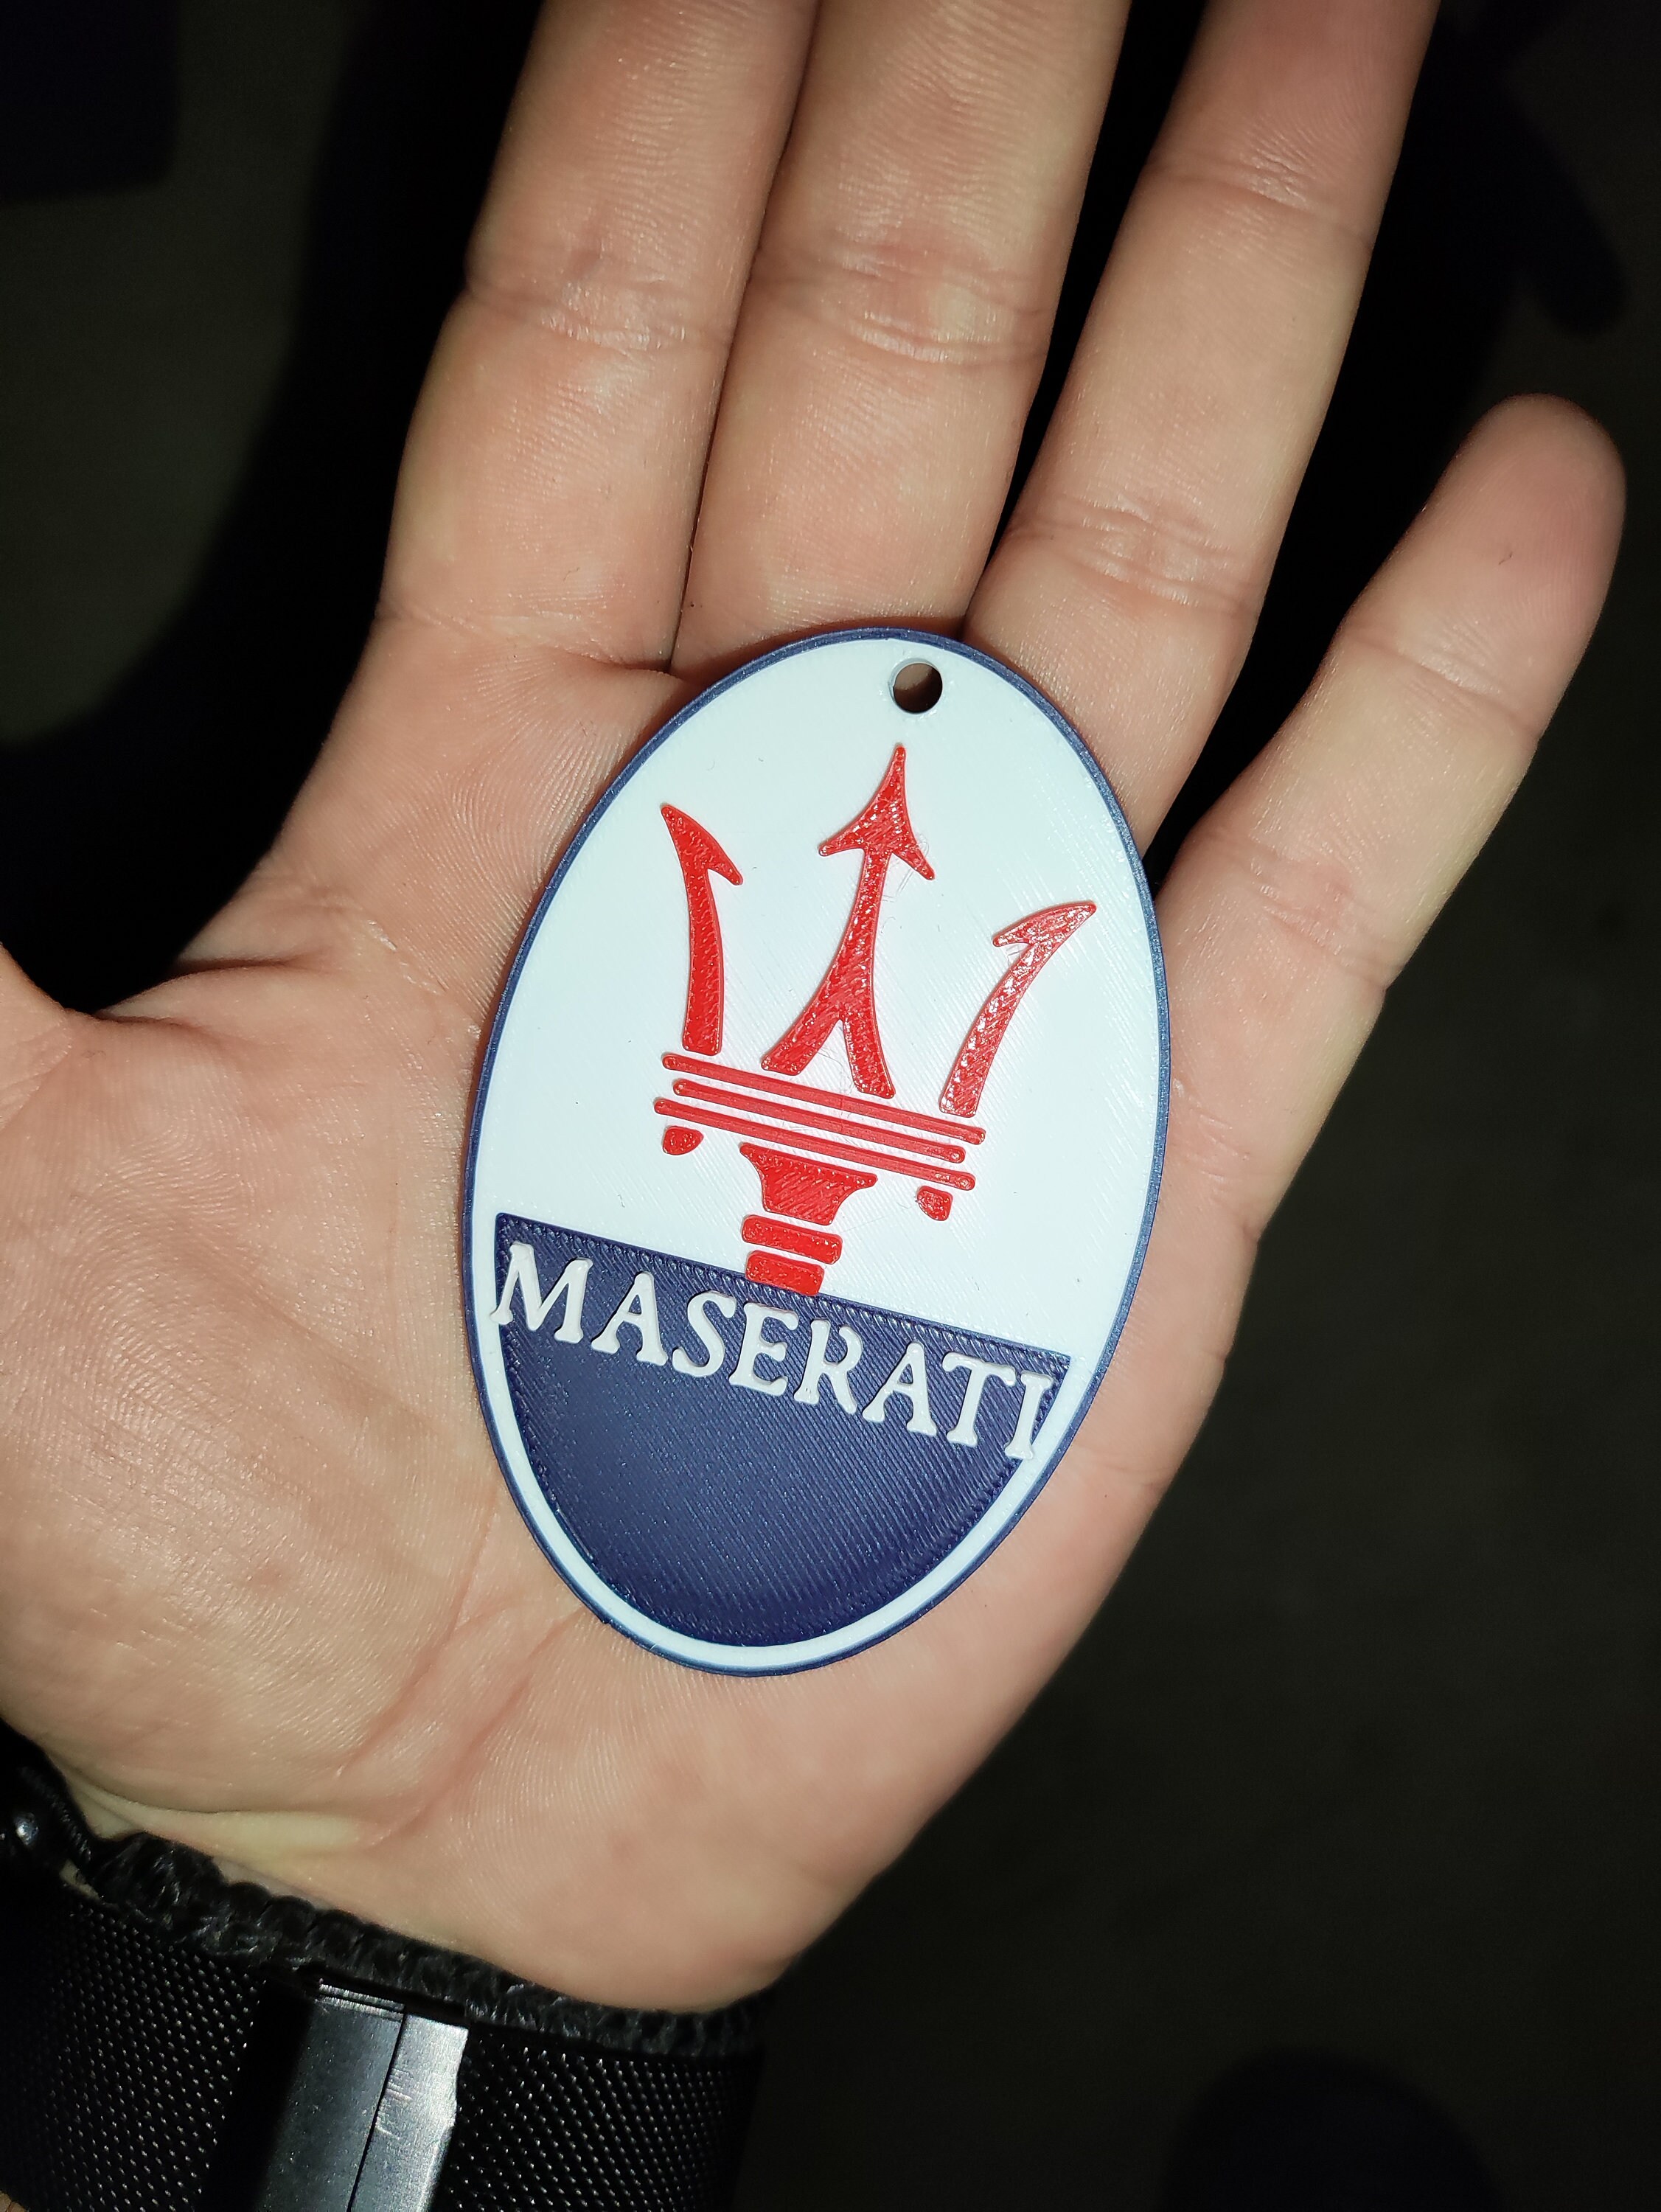 Maserati Logo 8 and 20 Cm 3D Print / Model 8cm 1 Bought 1 Offered 